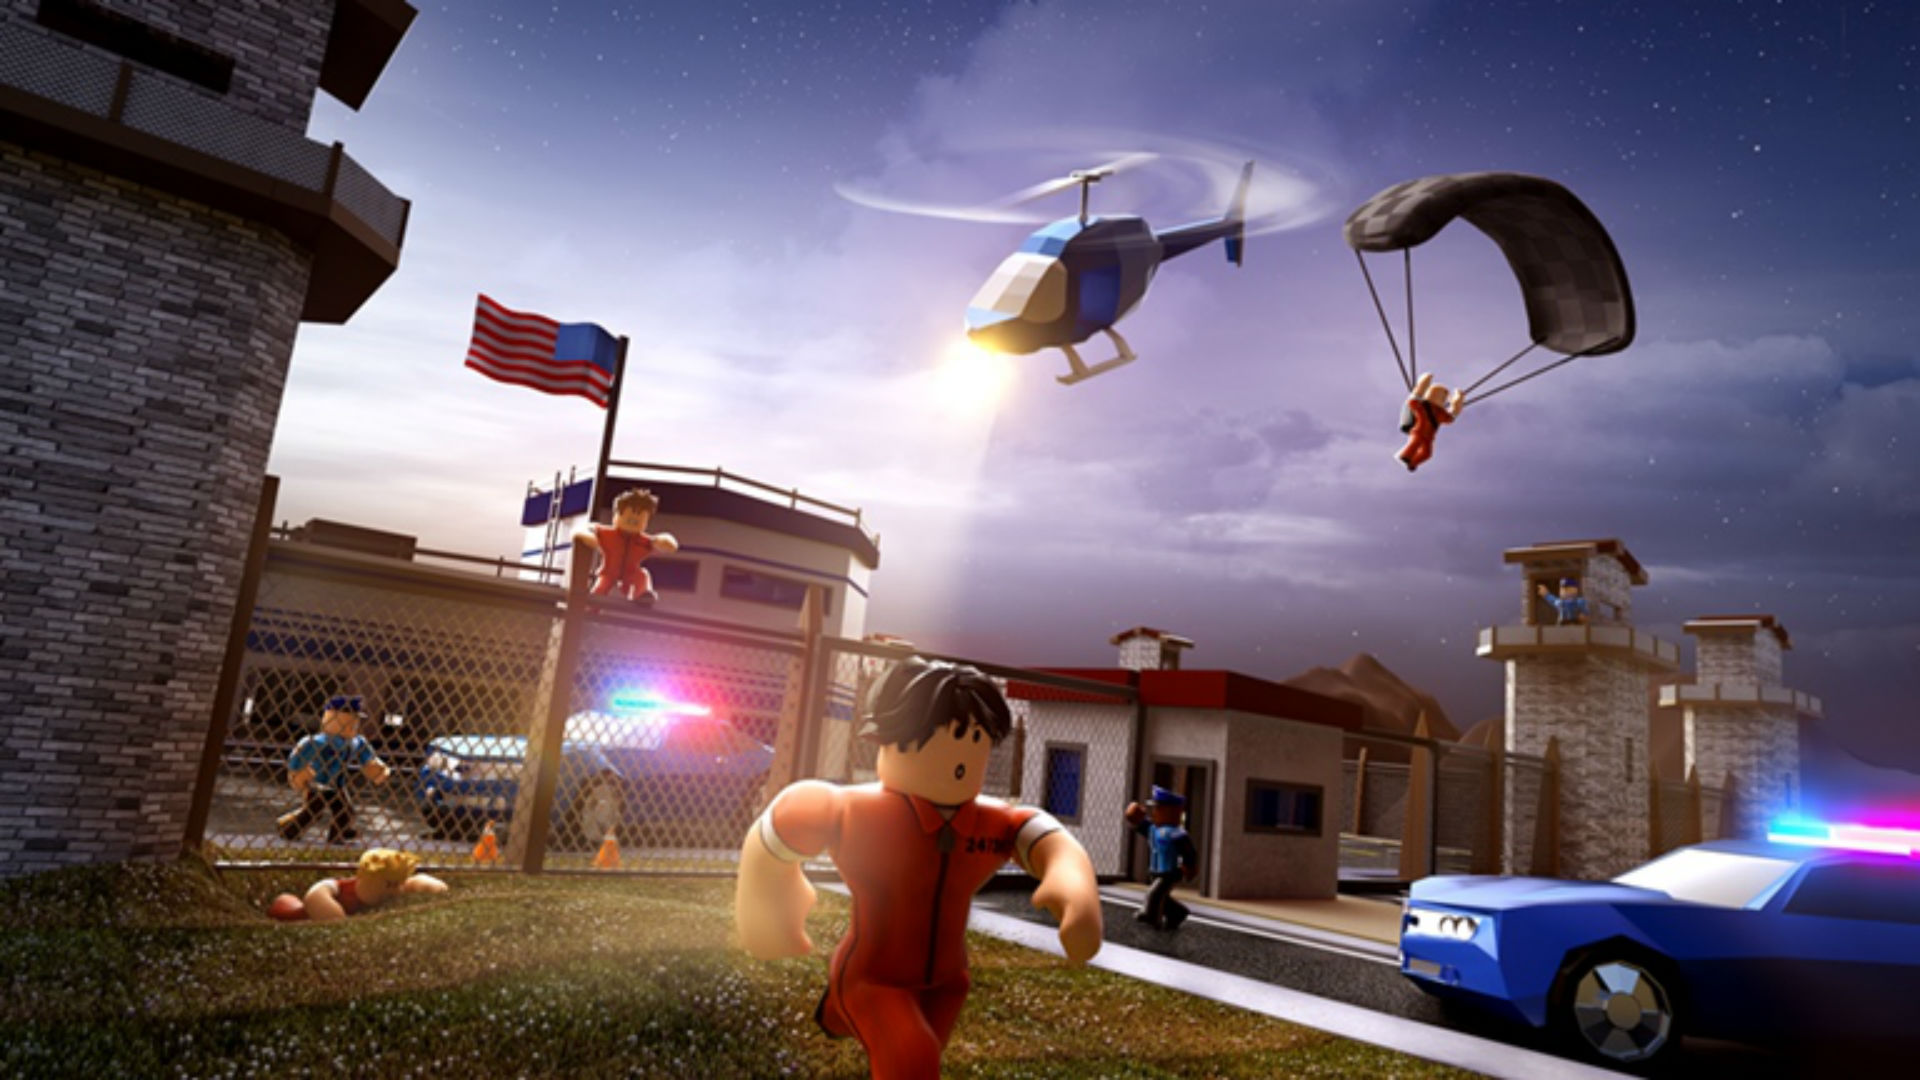 Roblox Games To Play For Free Now